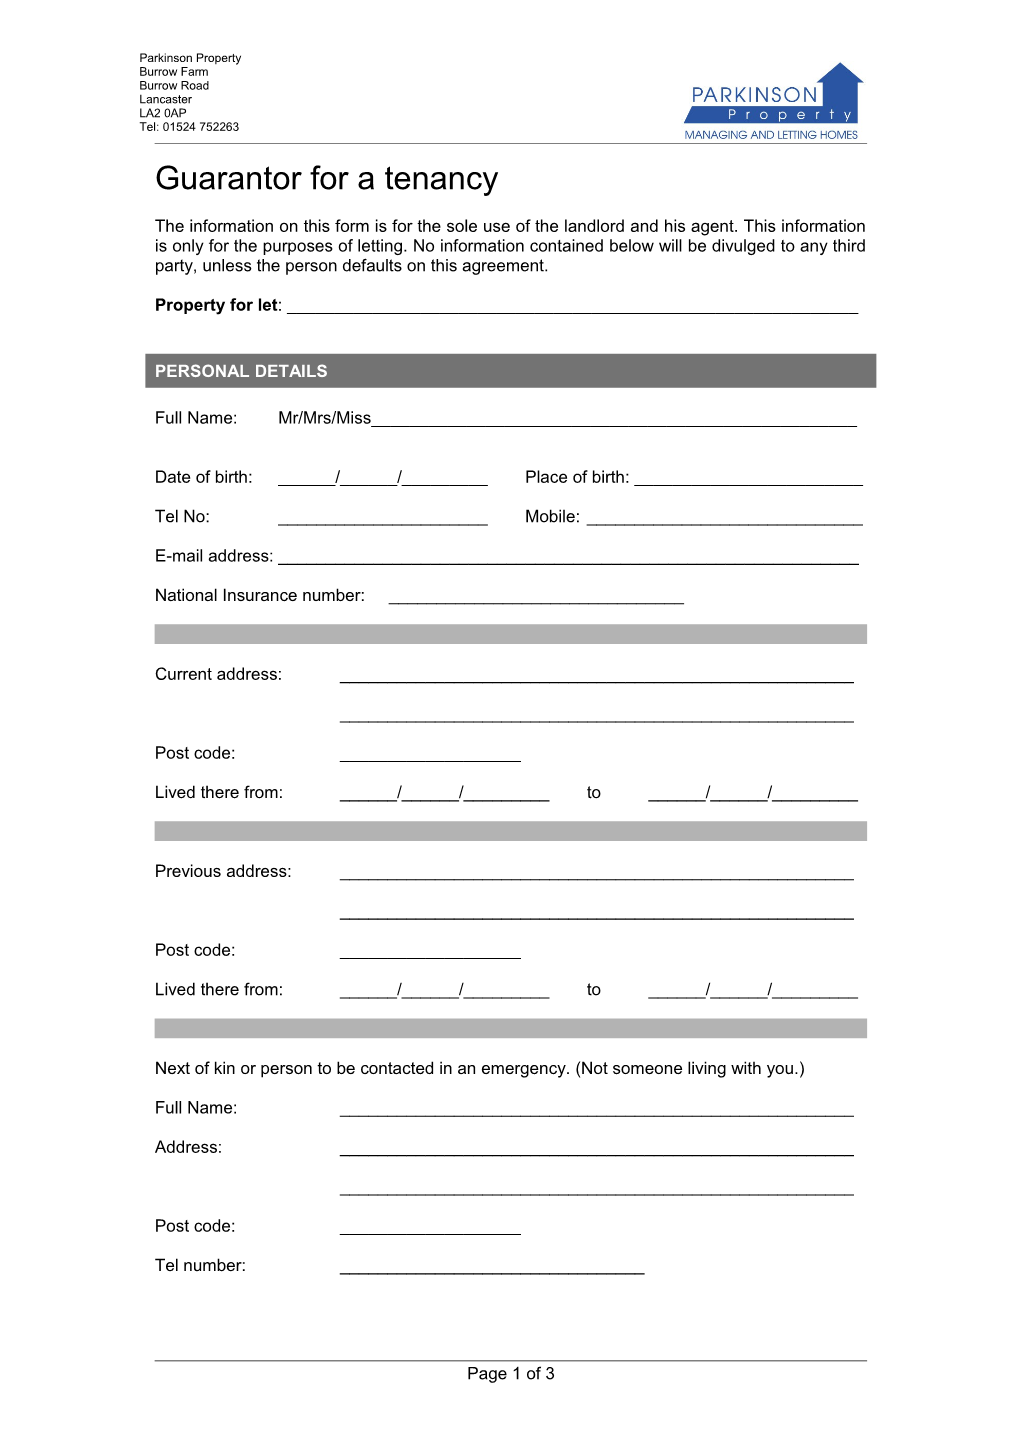 Application for a Tenancy